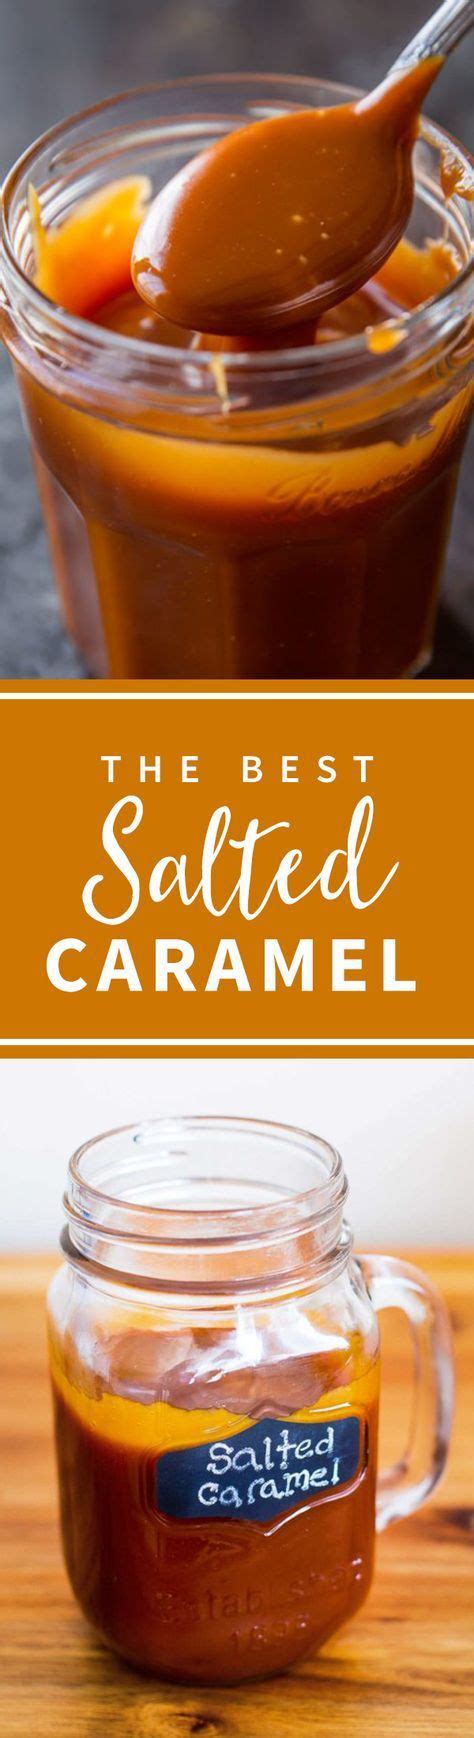 4 Ingredient 5 Minute Easy Salted Caramel The Best Caramel Sauce Recipe On